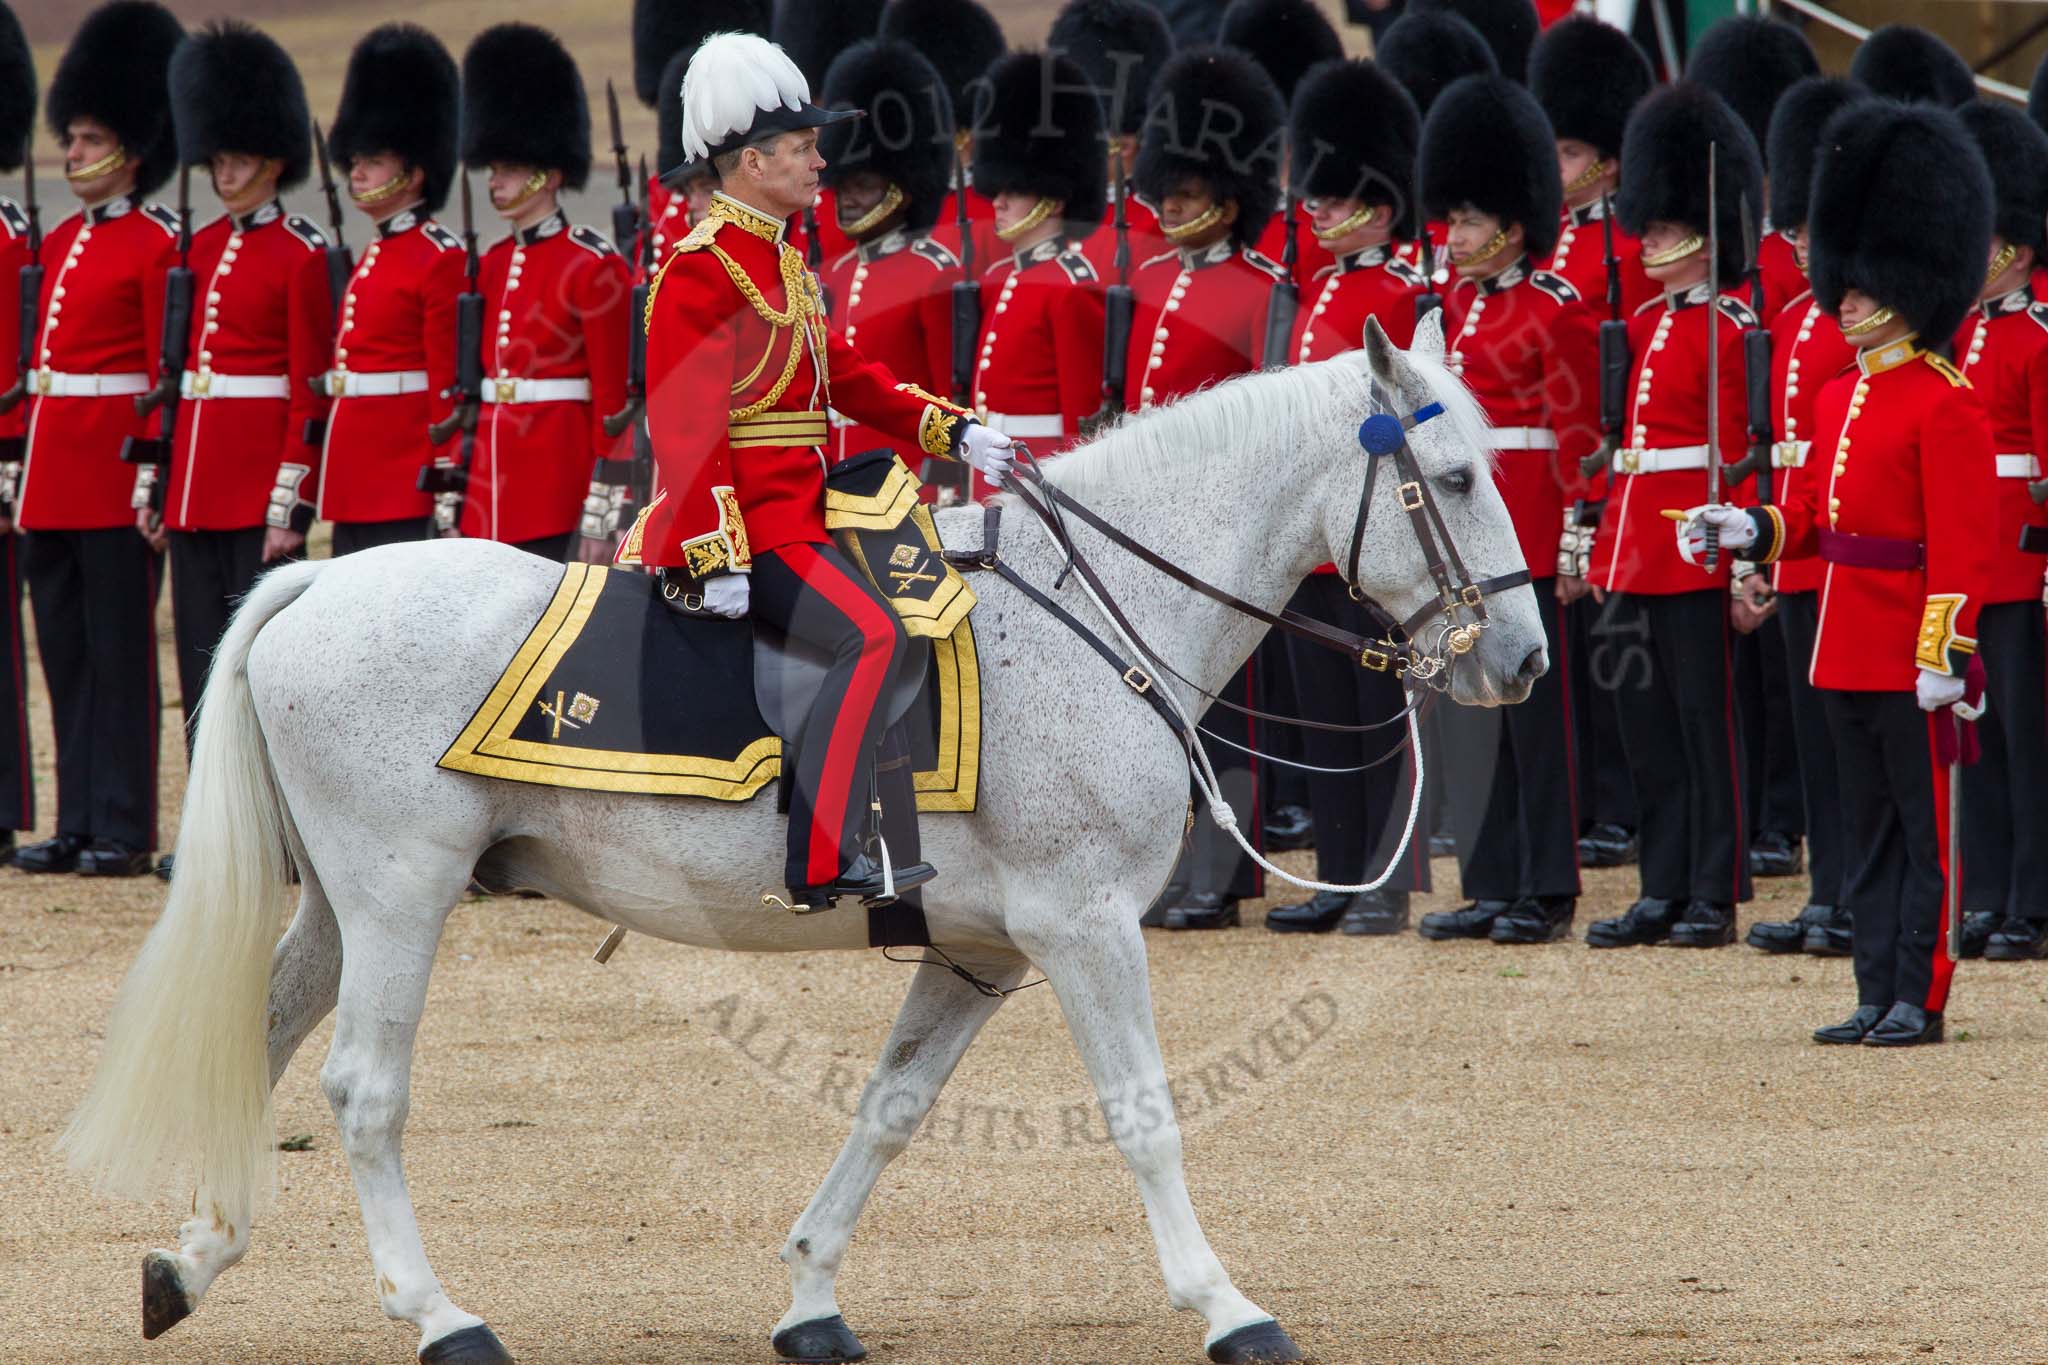 The Colonel's Review 2012: Major General Commanding the Household Division and General Officer Commanding London District Major General G P R Norton..
Horse Guards Parade, Westminster,
London SW1,

United Kingdom,
on 09 June 2012 at 11:02, image #182